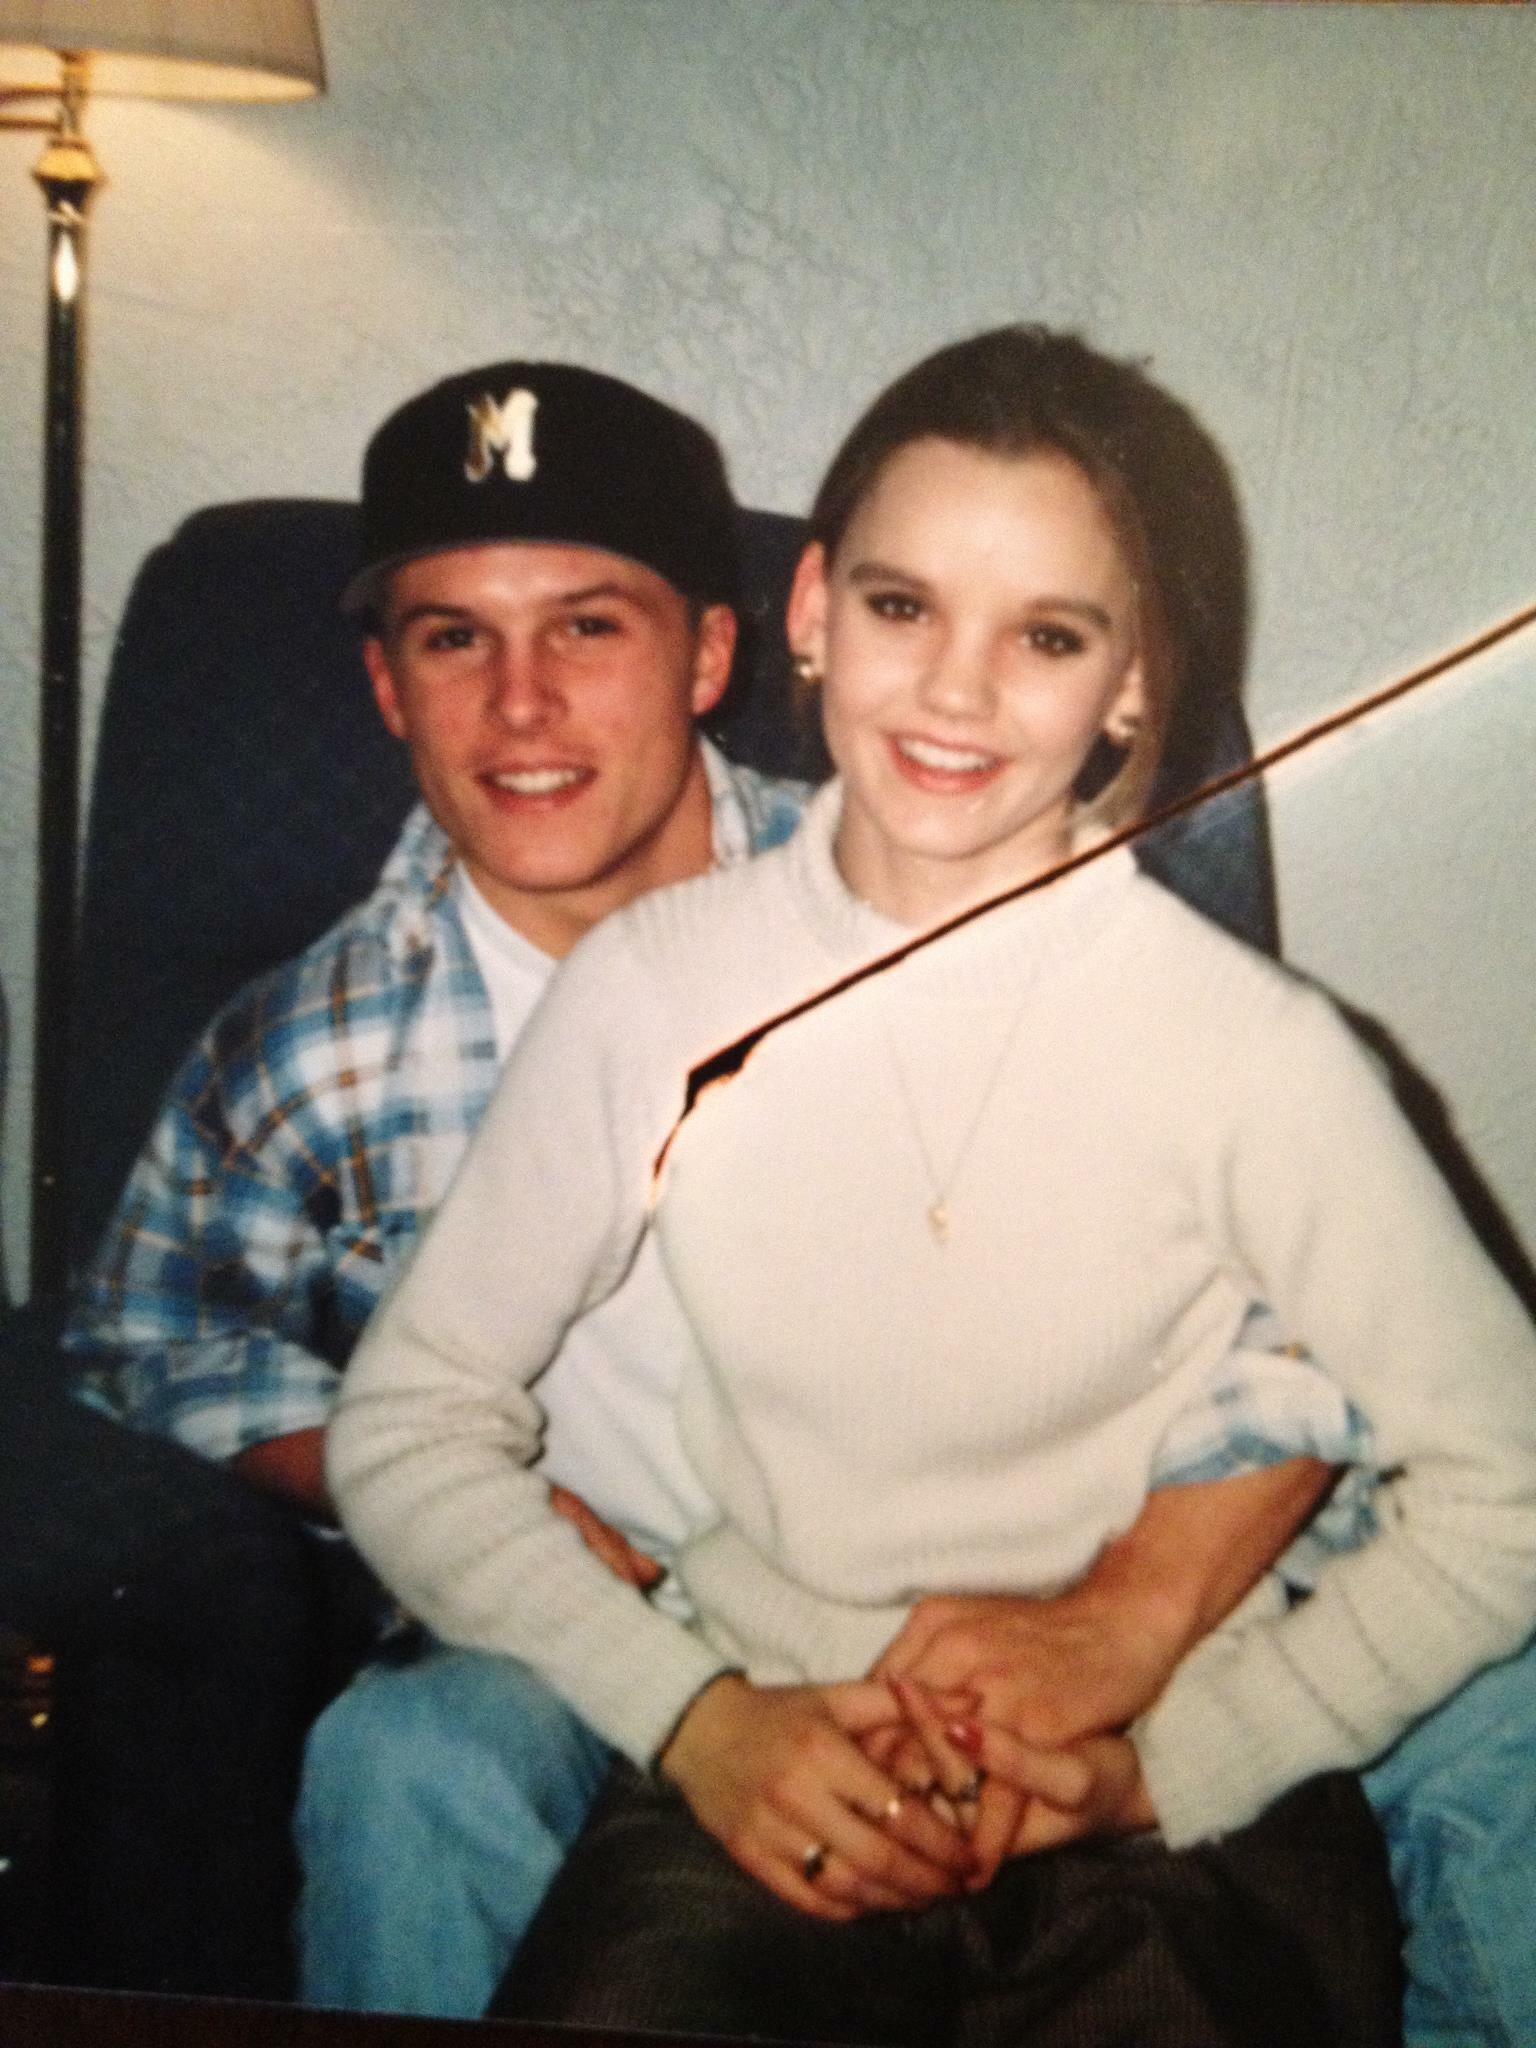 High School Sweethearts -Our Story